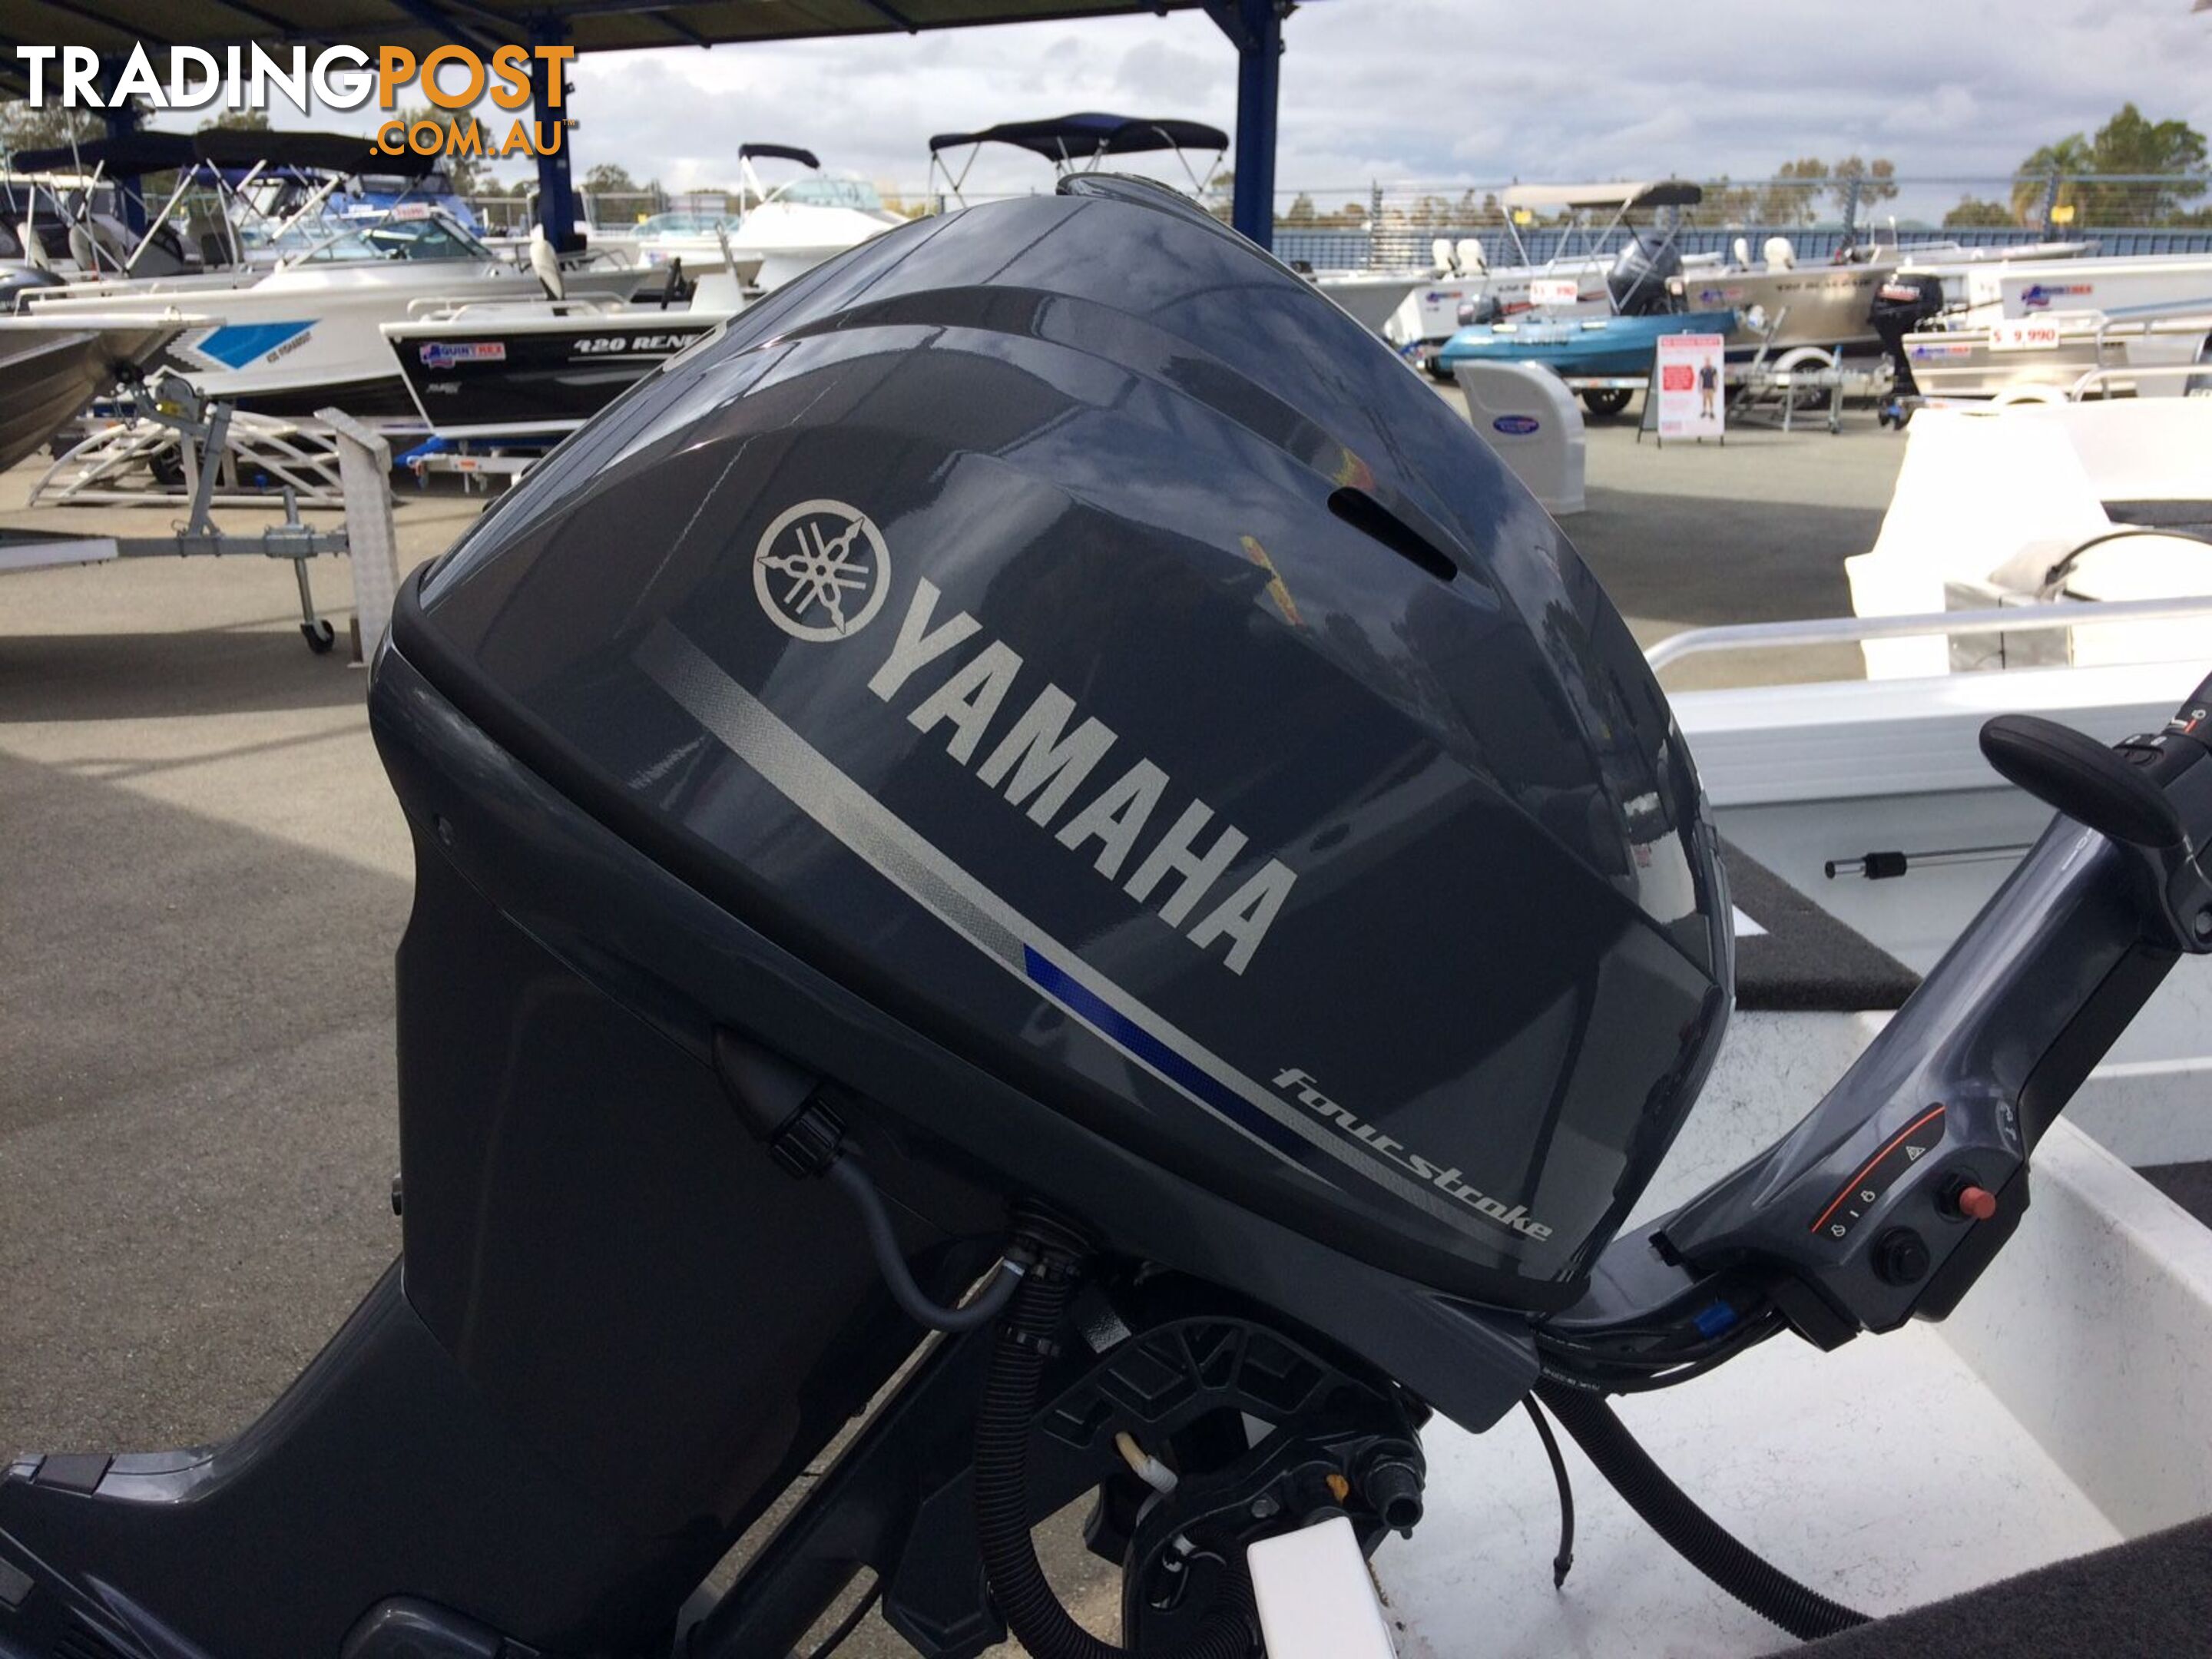 QUINTREX 420 BUSTA WITH YAMAHA 40HP FOURSTROKE FOR SALE